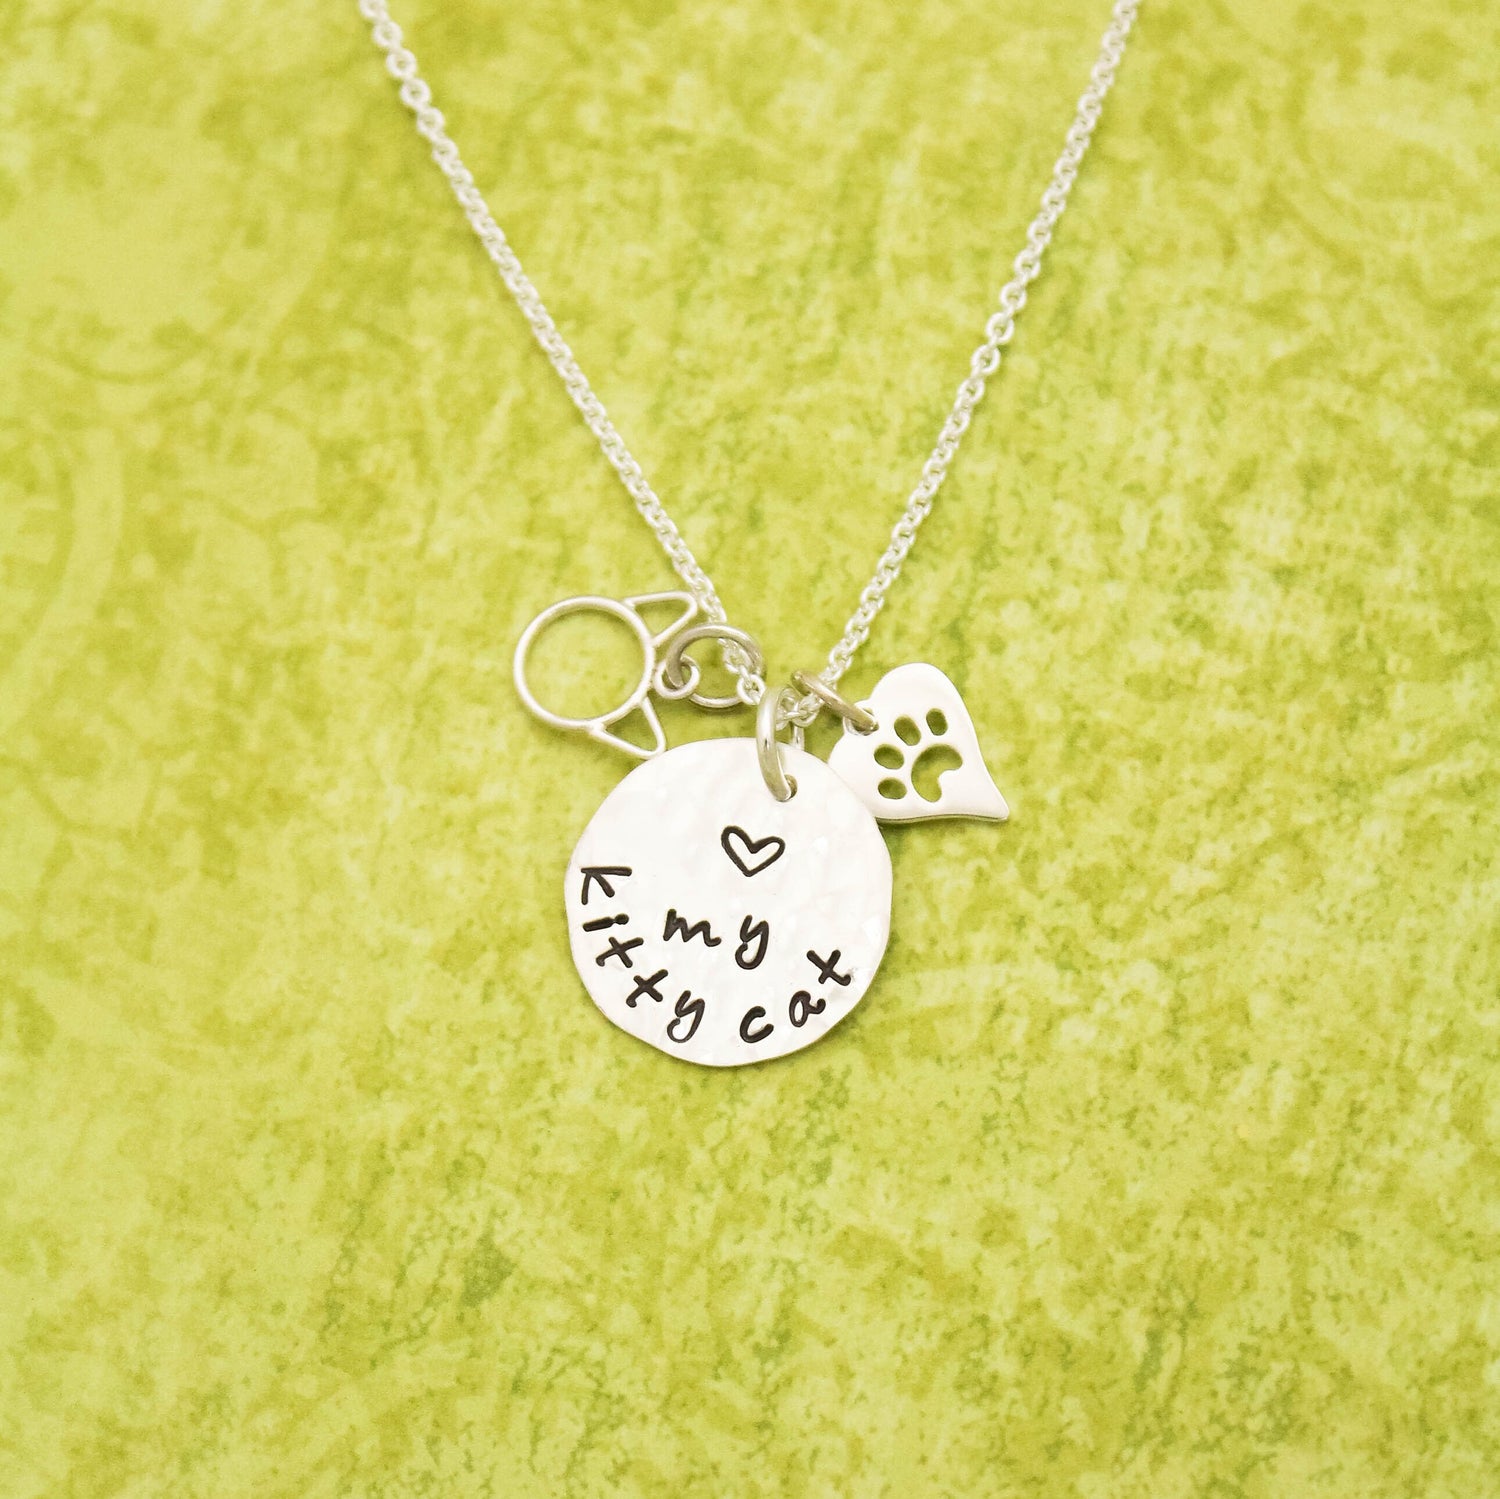 Love my Kitty Cat Necklace, Cat Lovers Necklace, Cat Paw Print Gift, Cat Jewelry, Paw Print Jewelry, Cat Lady Gift, Kitty Cat Lover Gift